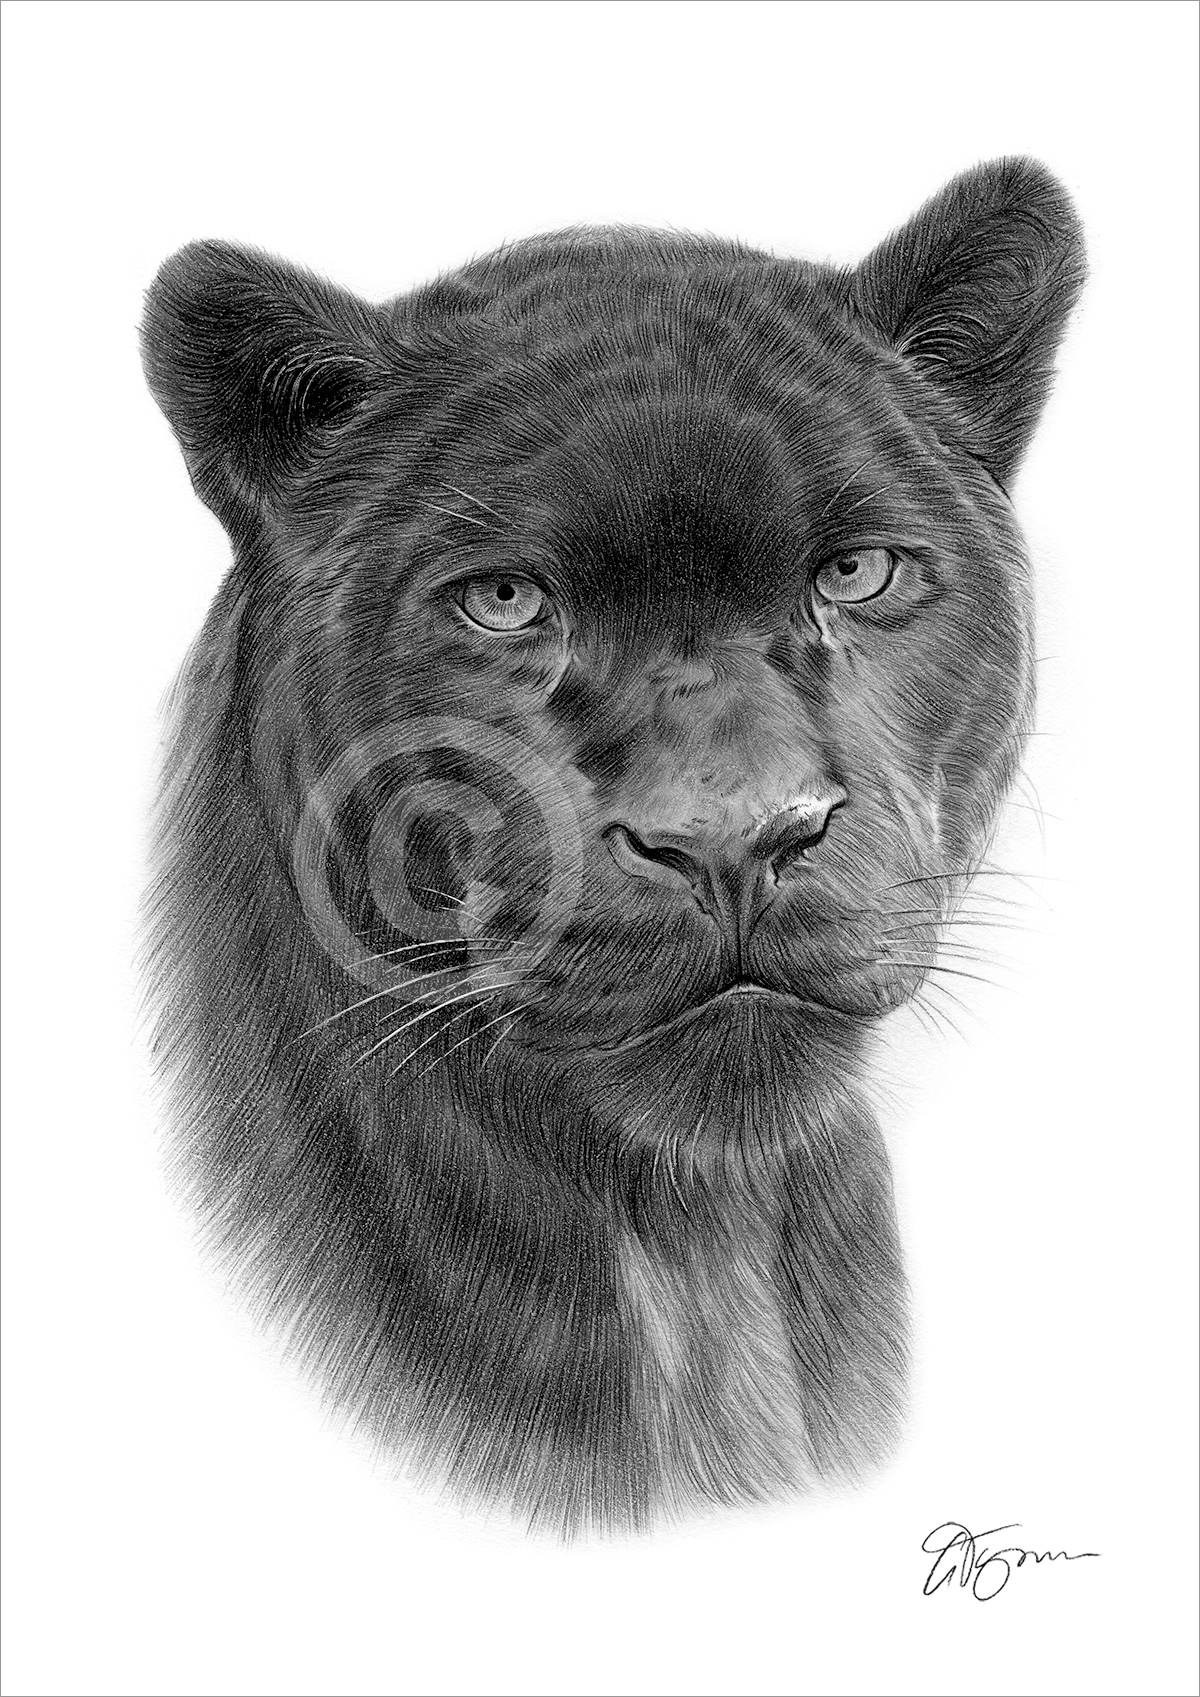 Pencil drawing of a black panther by artist Gary Tymon